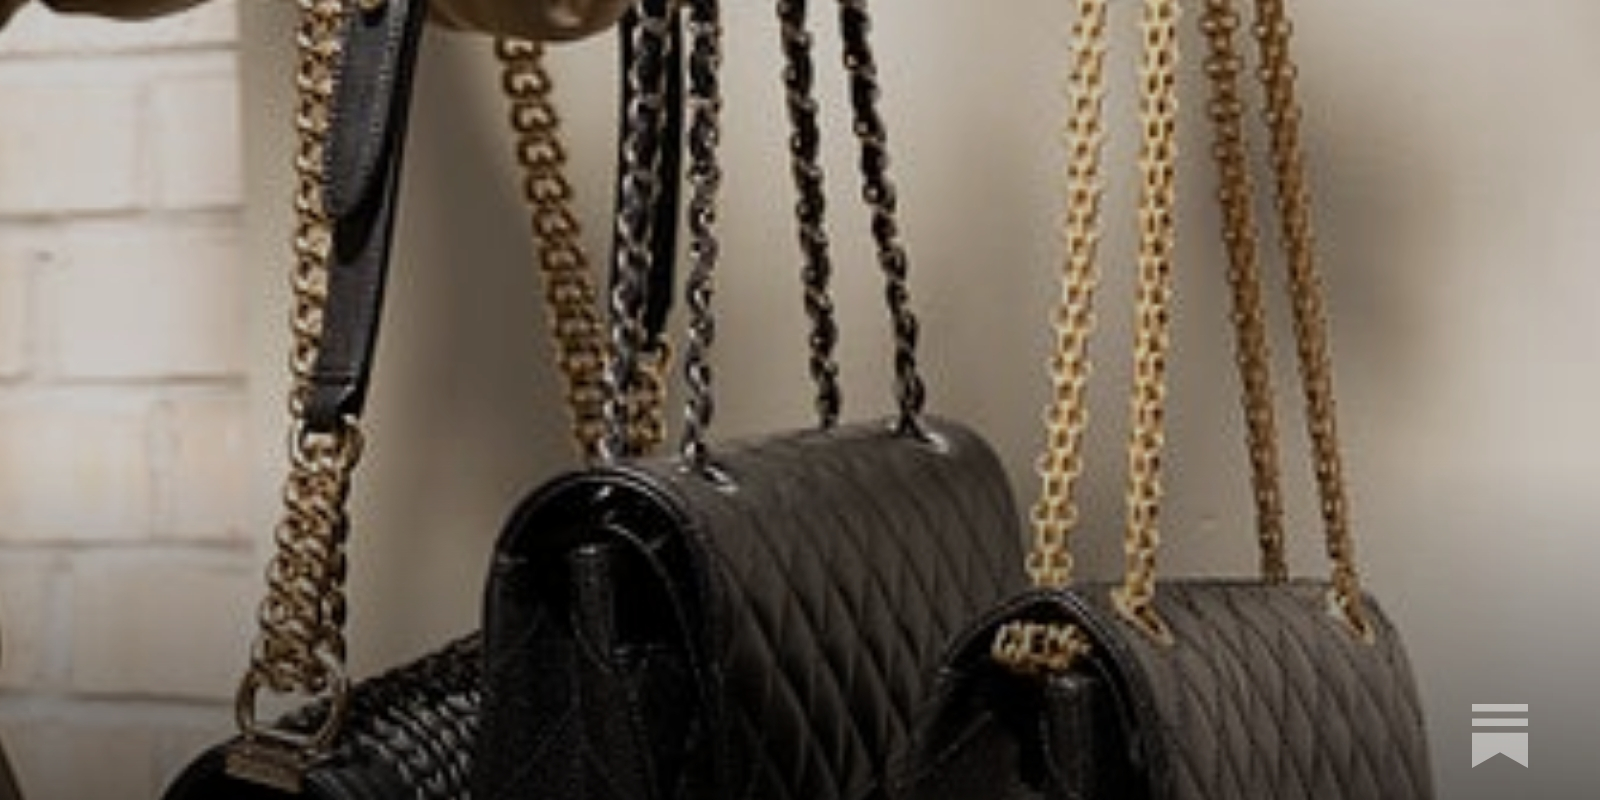 Is Chanel Raising Prices AGAIN?! - by CeCe Gehrig